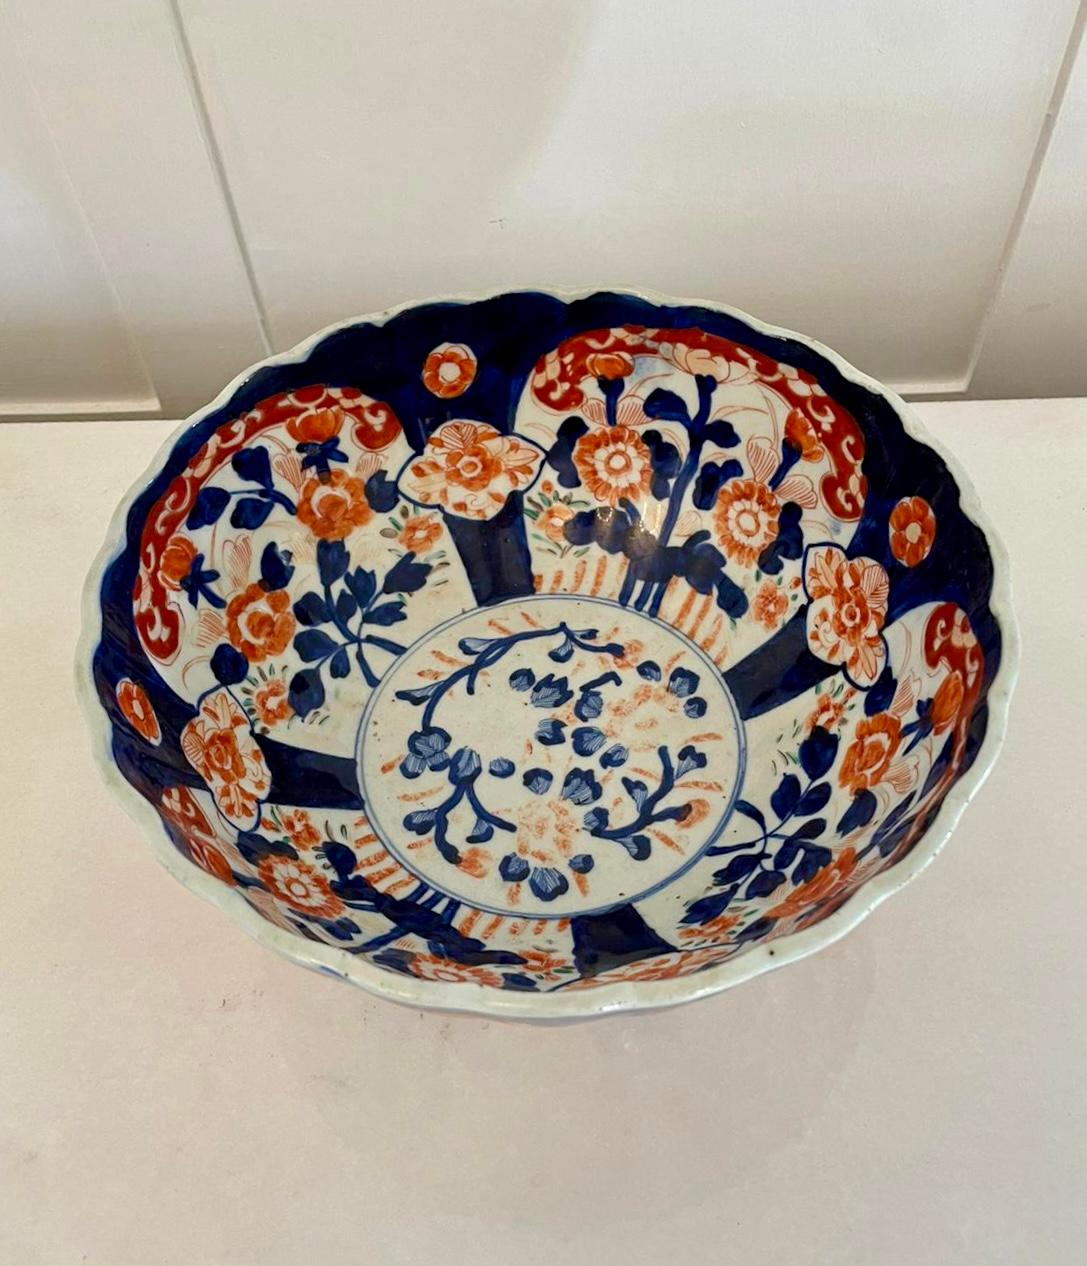 Antique quality Japanese Imari bowl having a quality scalloped shaped Japanese Imari bowl with wonderful hand painted decoration in red, blue, orange and white colours 

In lovely original condition

Measures: H 10 x W 24.5 x D 24.5cm
Date